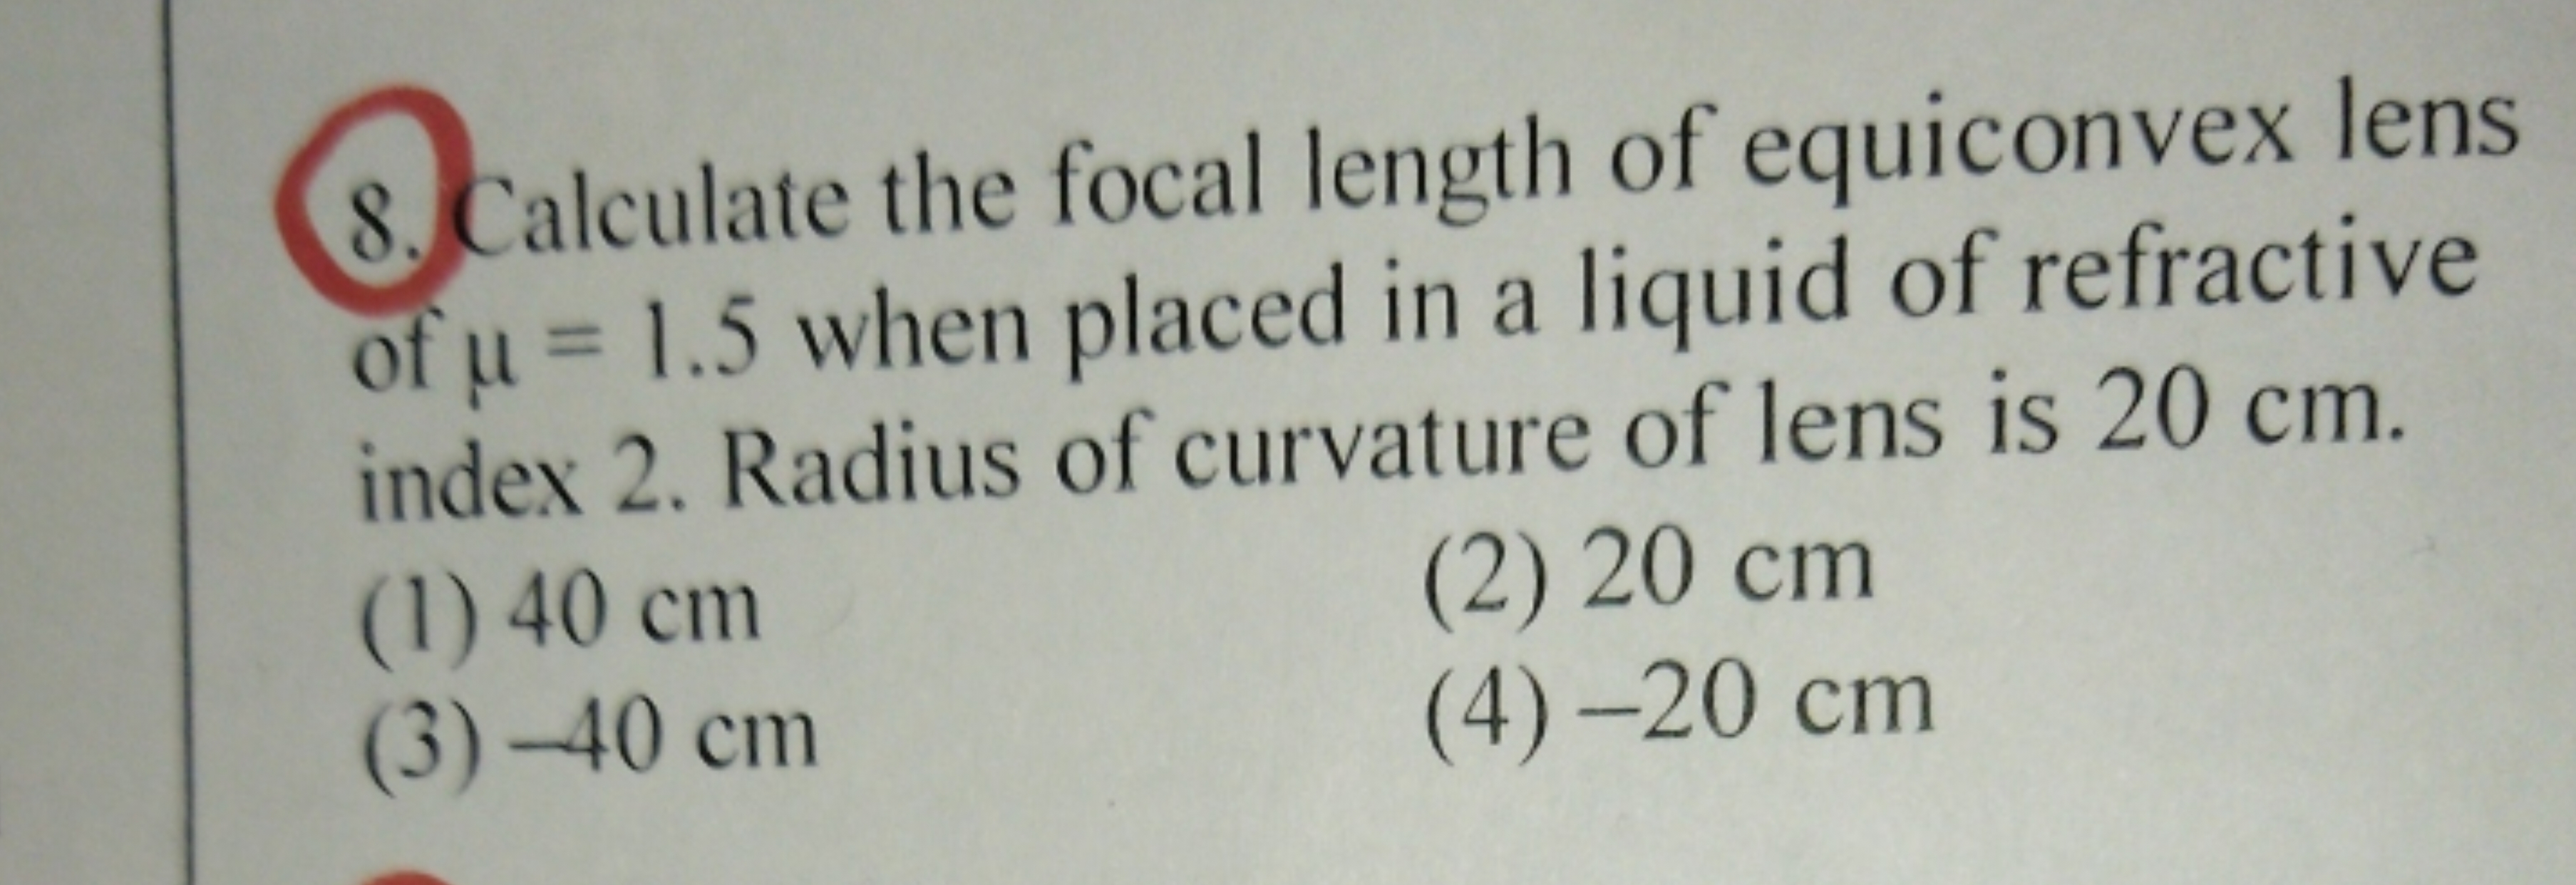 Calculate the focal length of equiconvex lens of μ=1.5 when placed in 